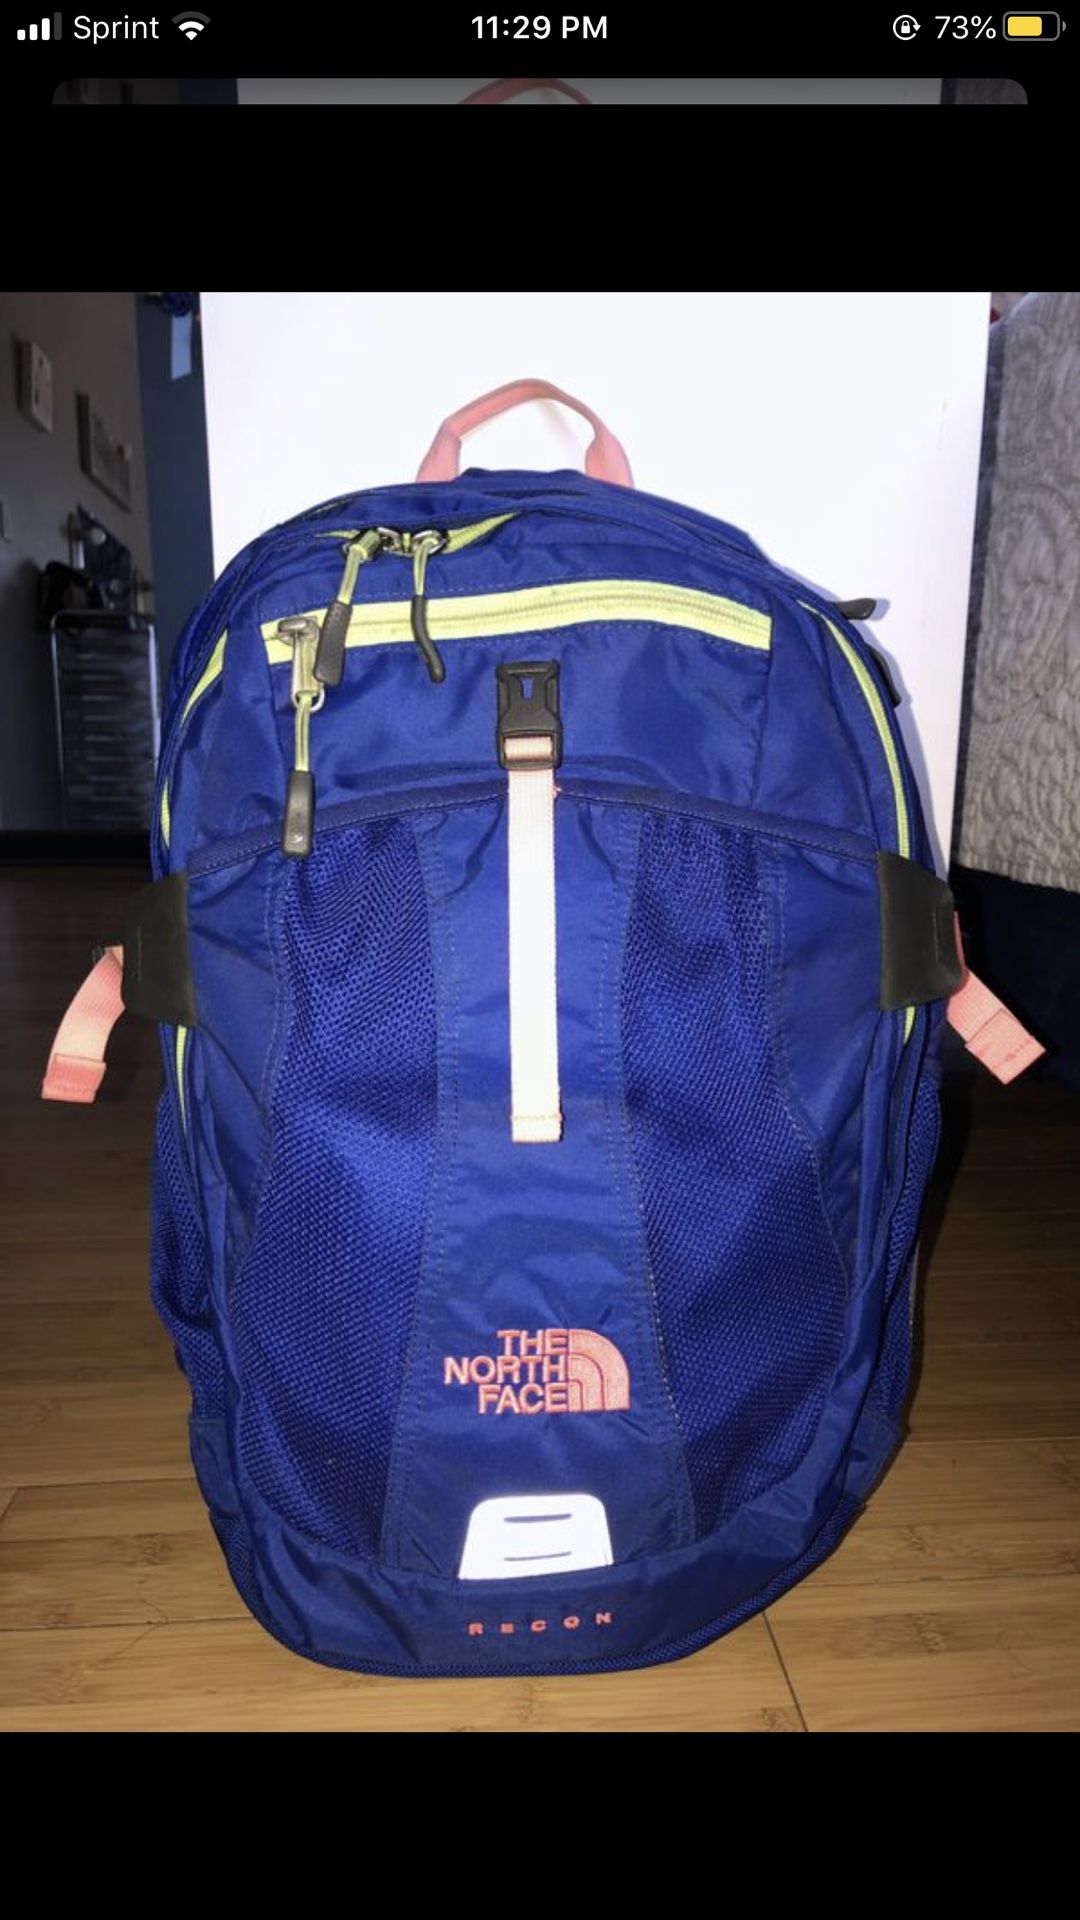 The North Face backpack (blue)